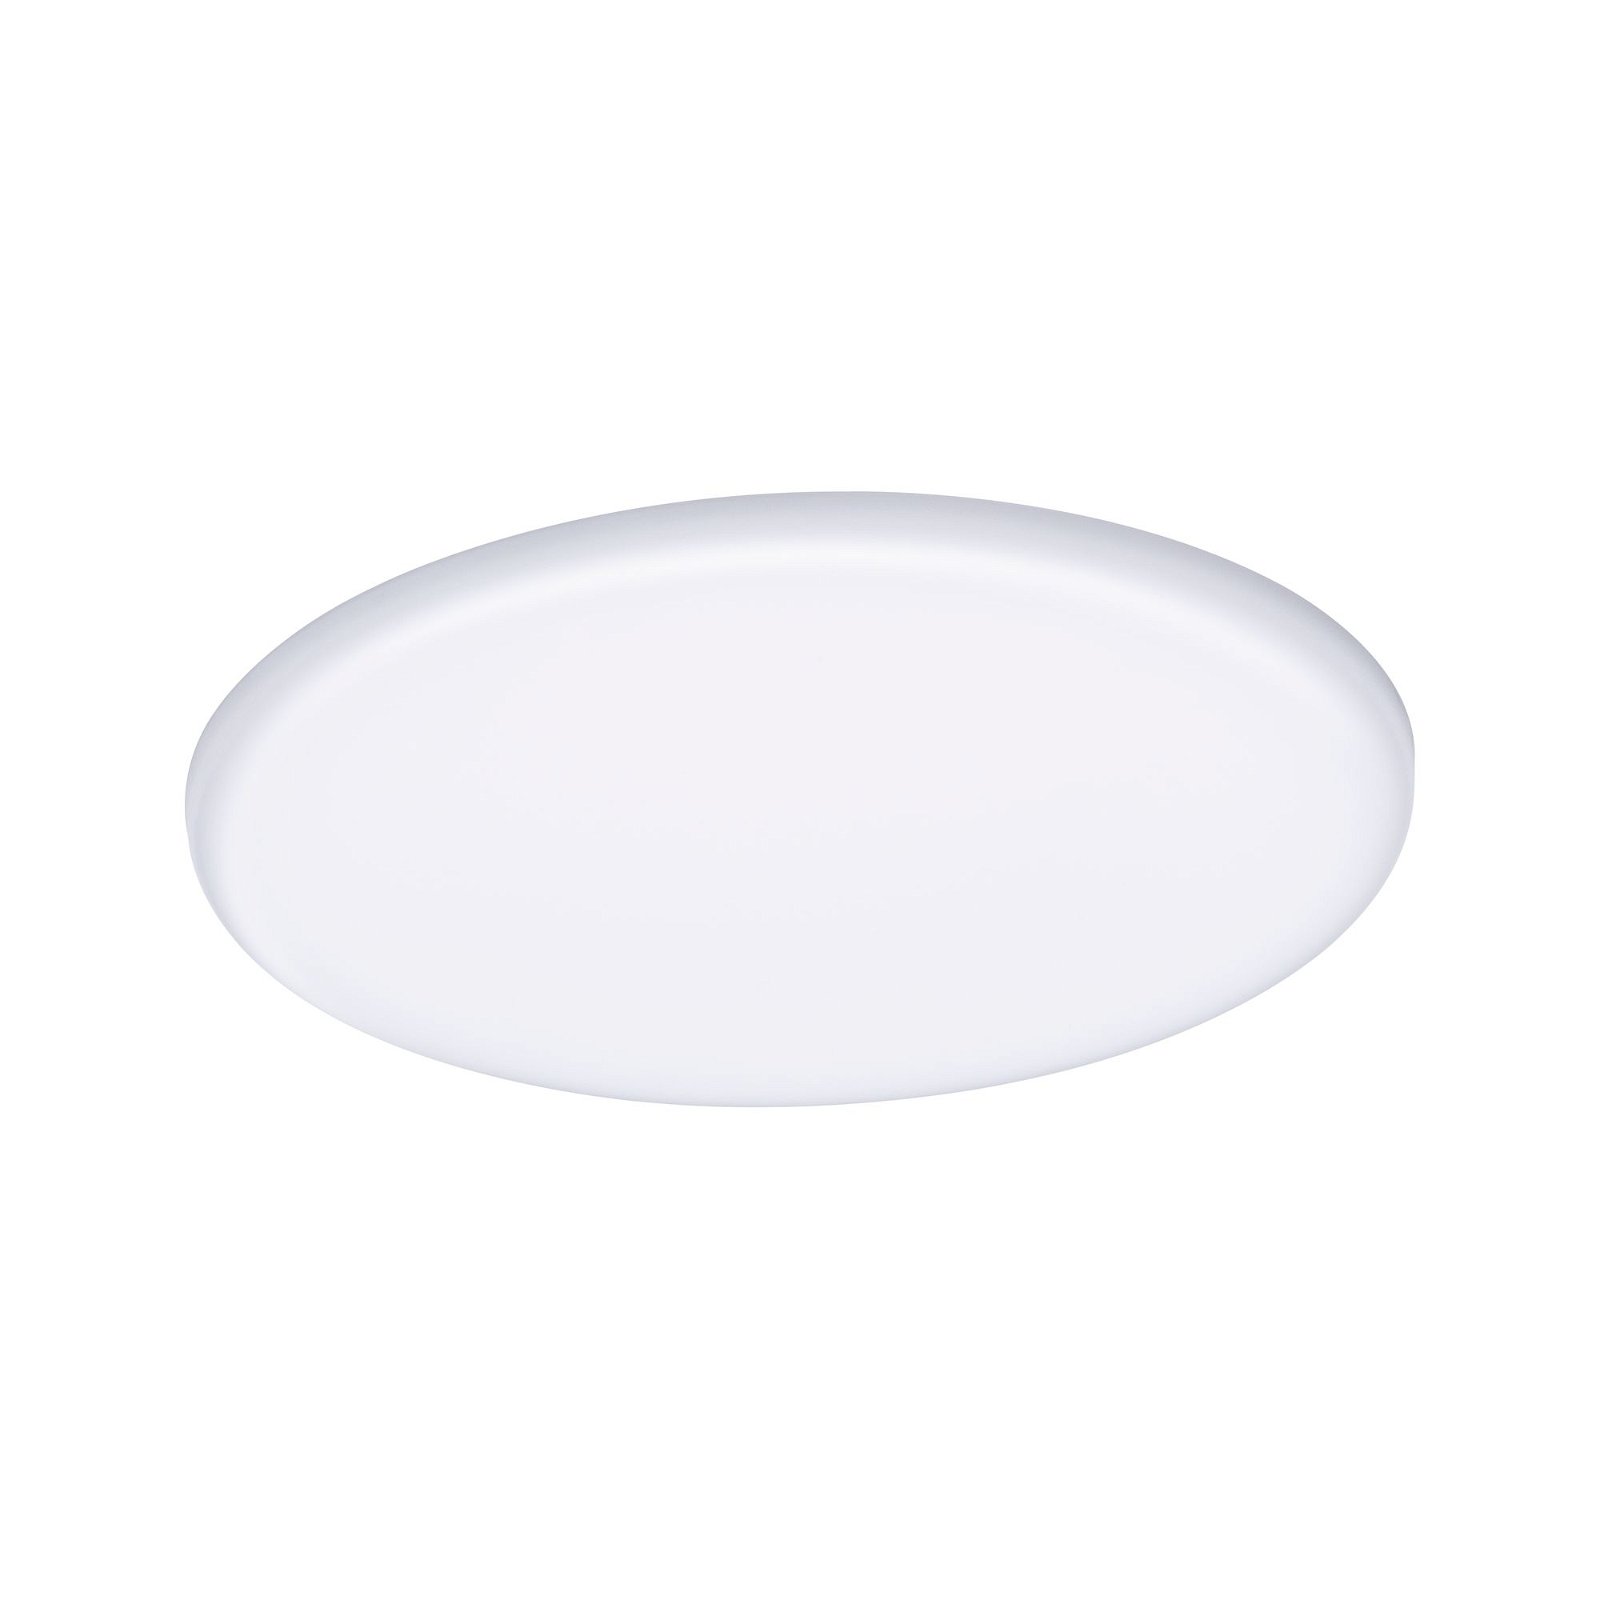 VariFit LED Recessed panel Smart Home Zigbee 3.0 Veluna IP44 round 185mm 15W 1000lm Tunable White Satin dimmable